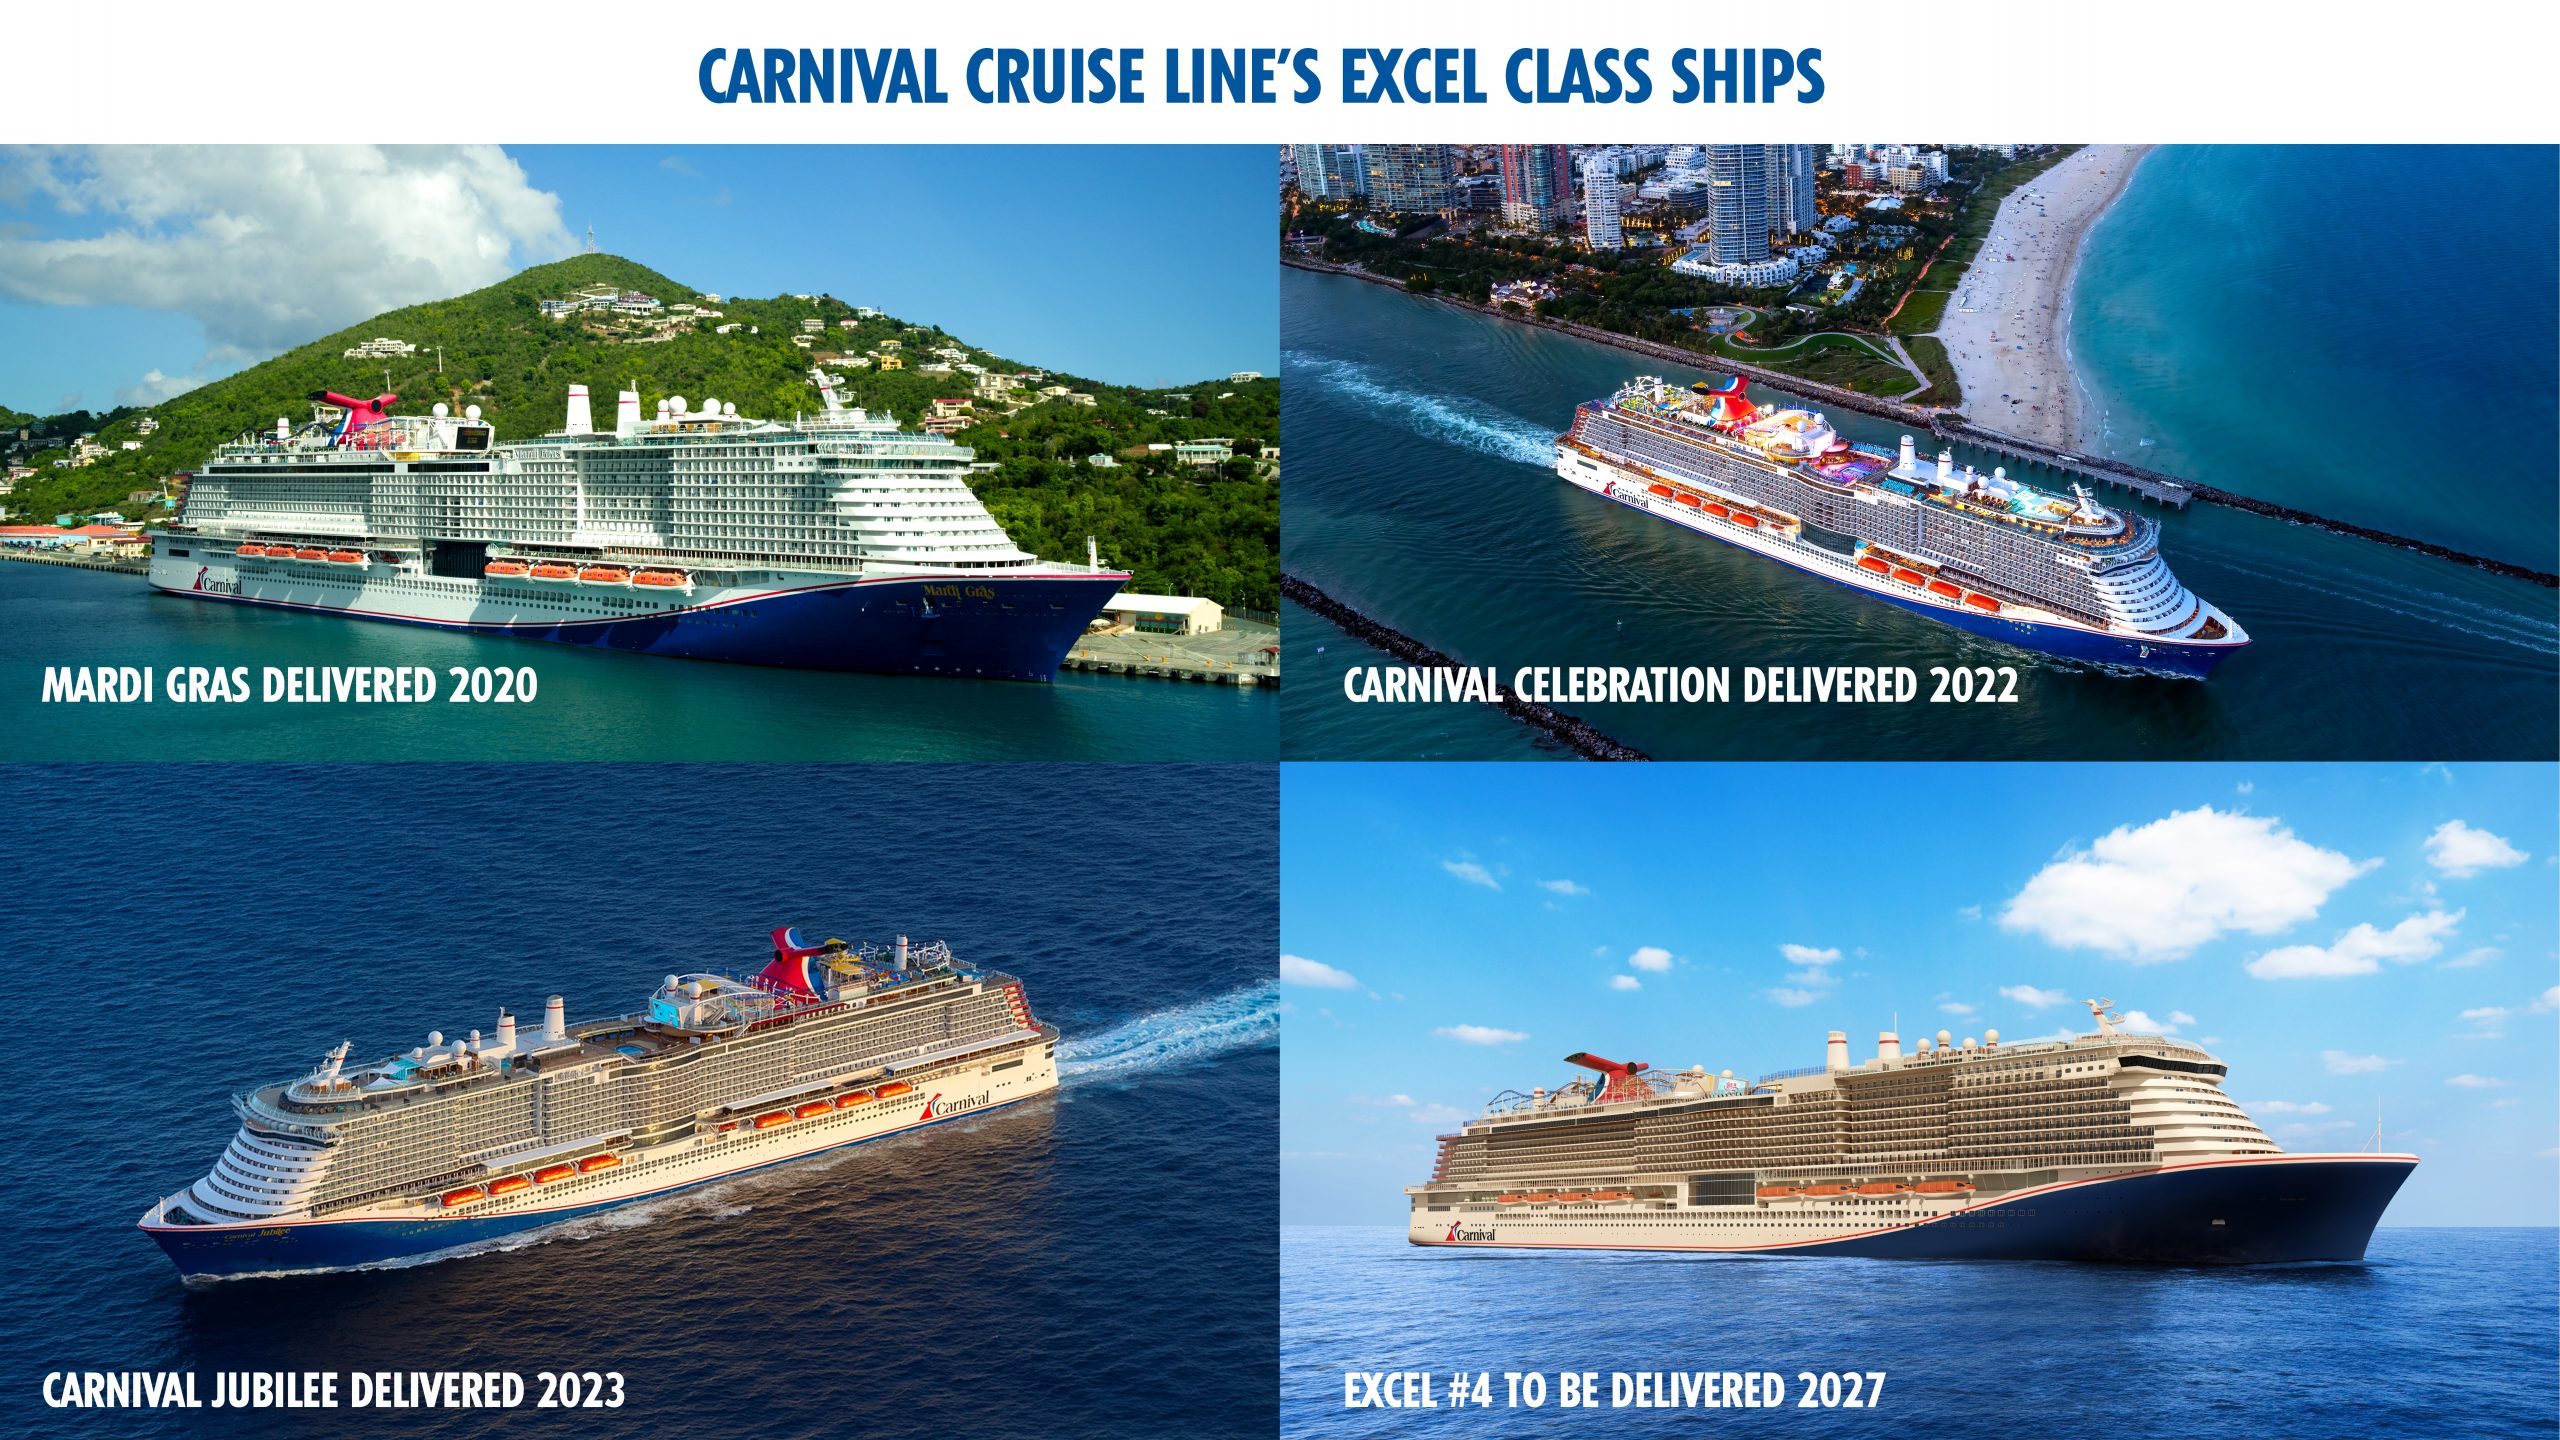 Carnival Corporation Orders Fourth Excel-Class Ship for Carnival Cruise Line